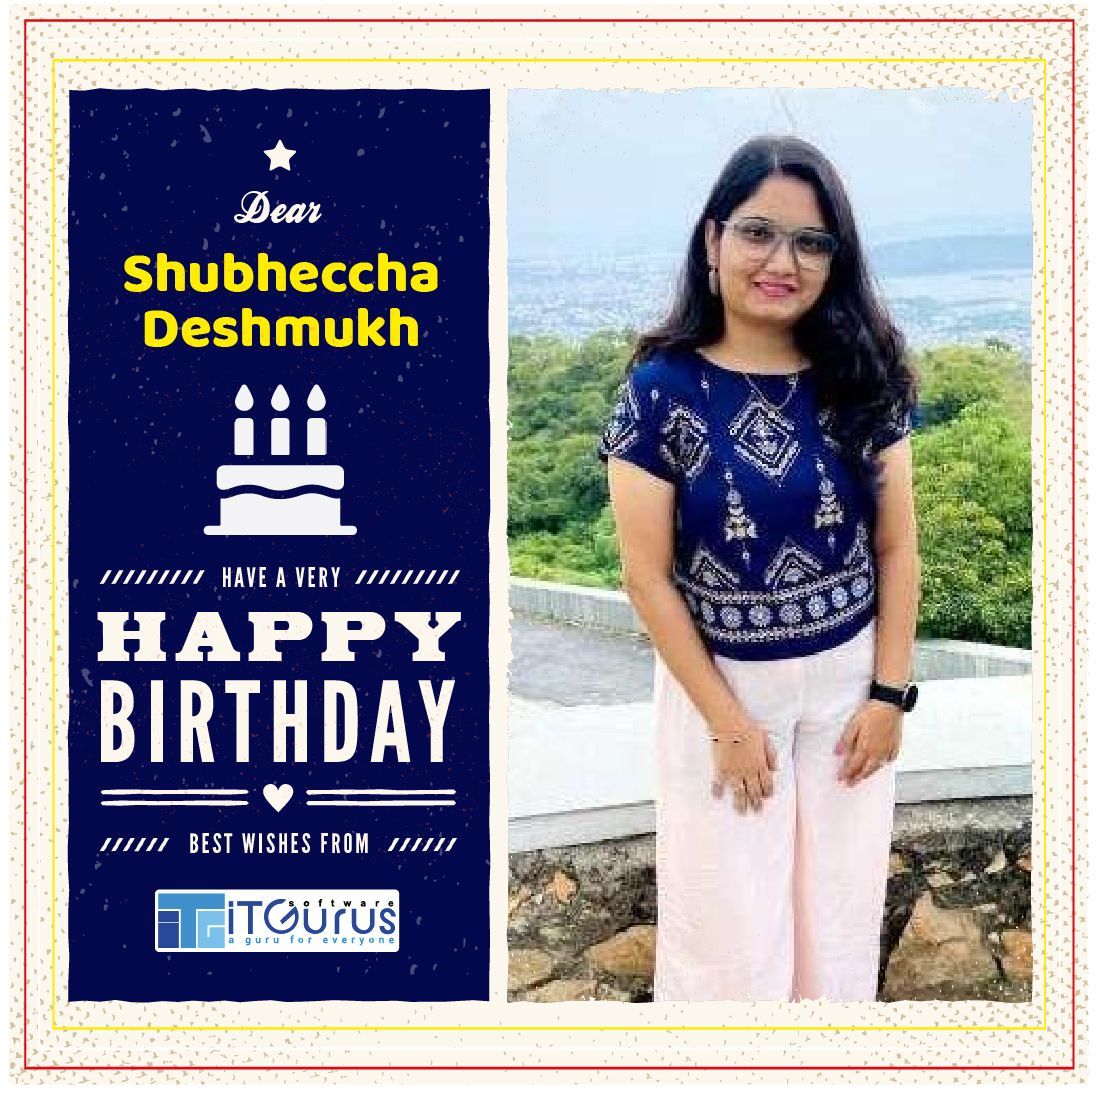 Celebrating the awesome person you are today and always!
Happy Birthday to @ Shubheccha Deshmukh from Team iT Gurus Software!

#birthday #birthdaycake #birthdayparty #birthdaycakes #birthdayballoons #birthdaydecoration #happybd #happybday #birthdayinoffice